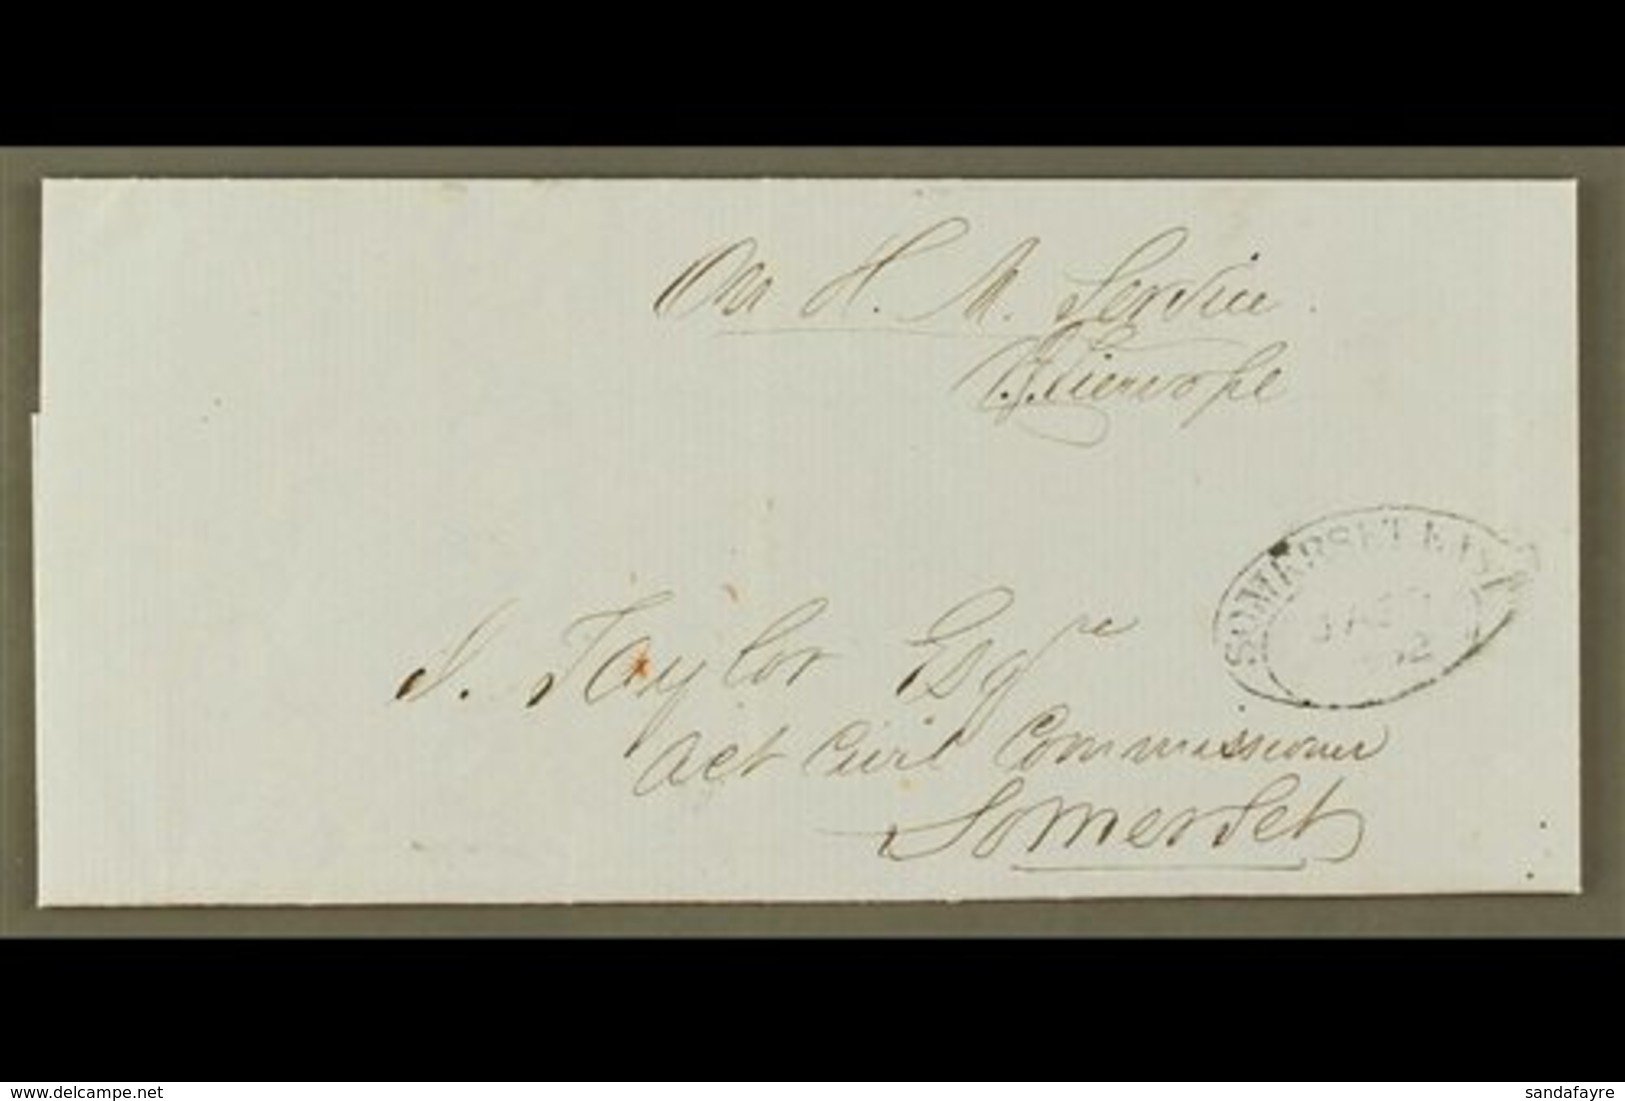 CAPE 1862 (29 Jan) Cover From Pearston To Somerset East, With Dated Oval Handstamp In Red On Reverse, Oval Arrival Mark, - Ohne Zuordnung